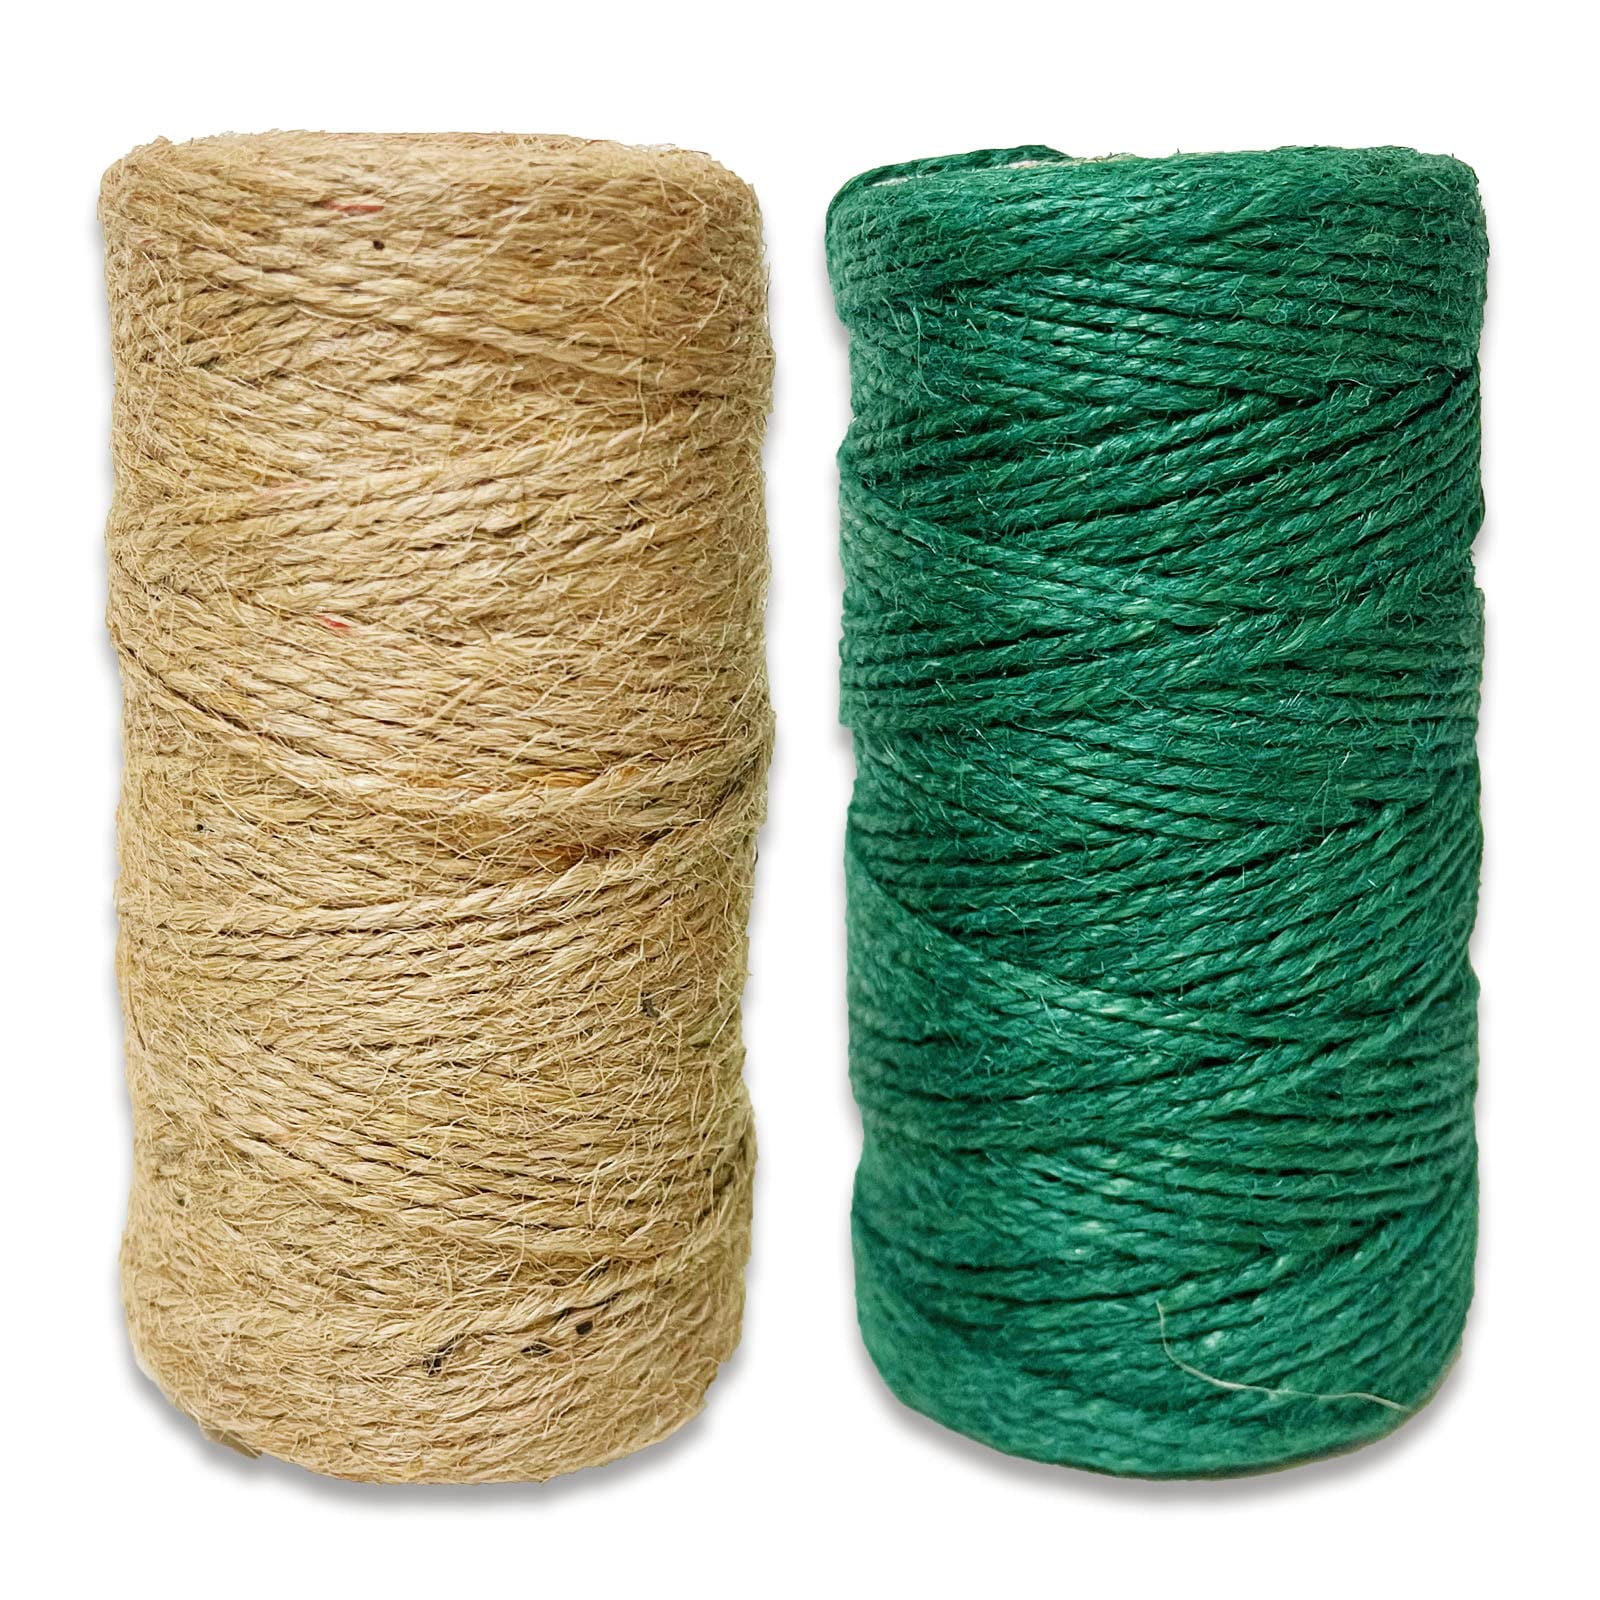 Jute Rope Thick 250gm - Bulk Apothecary